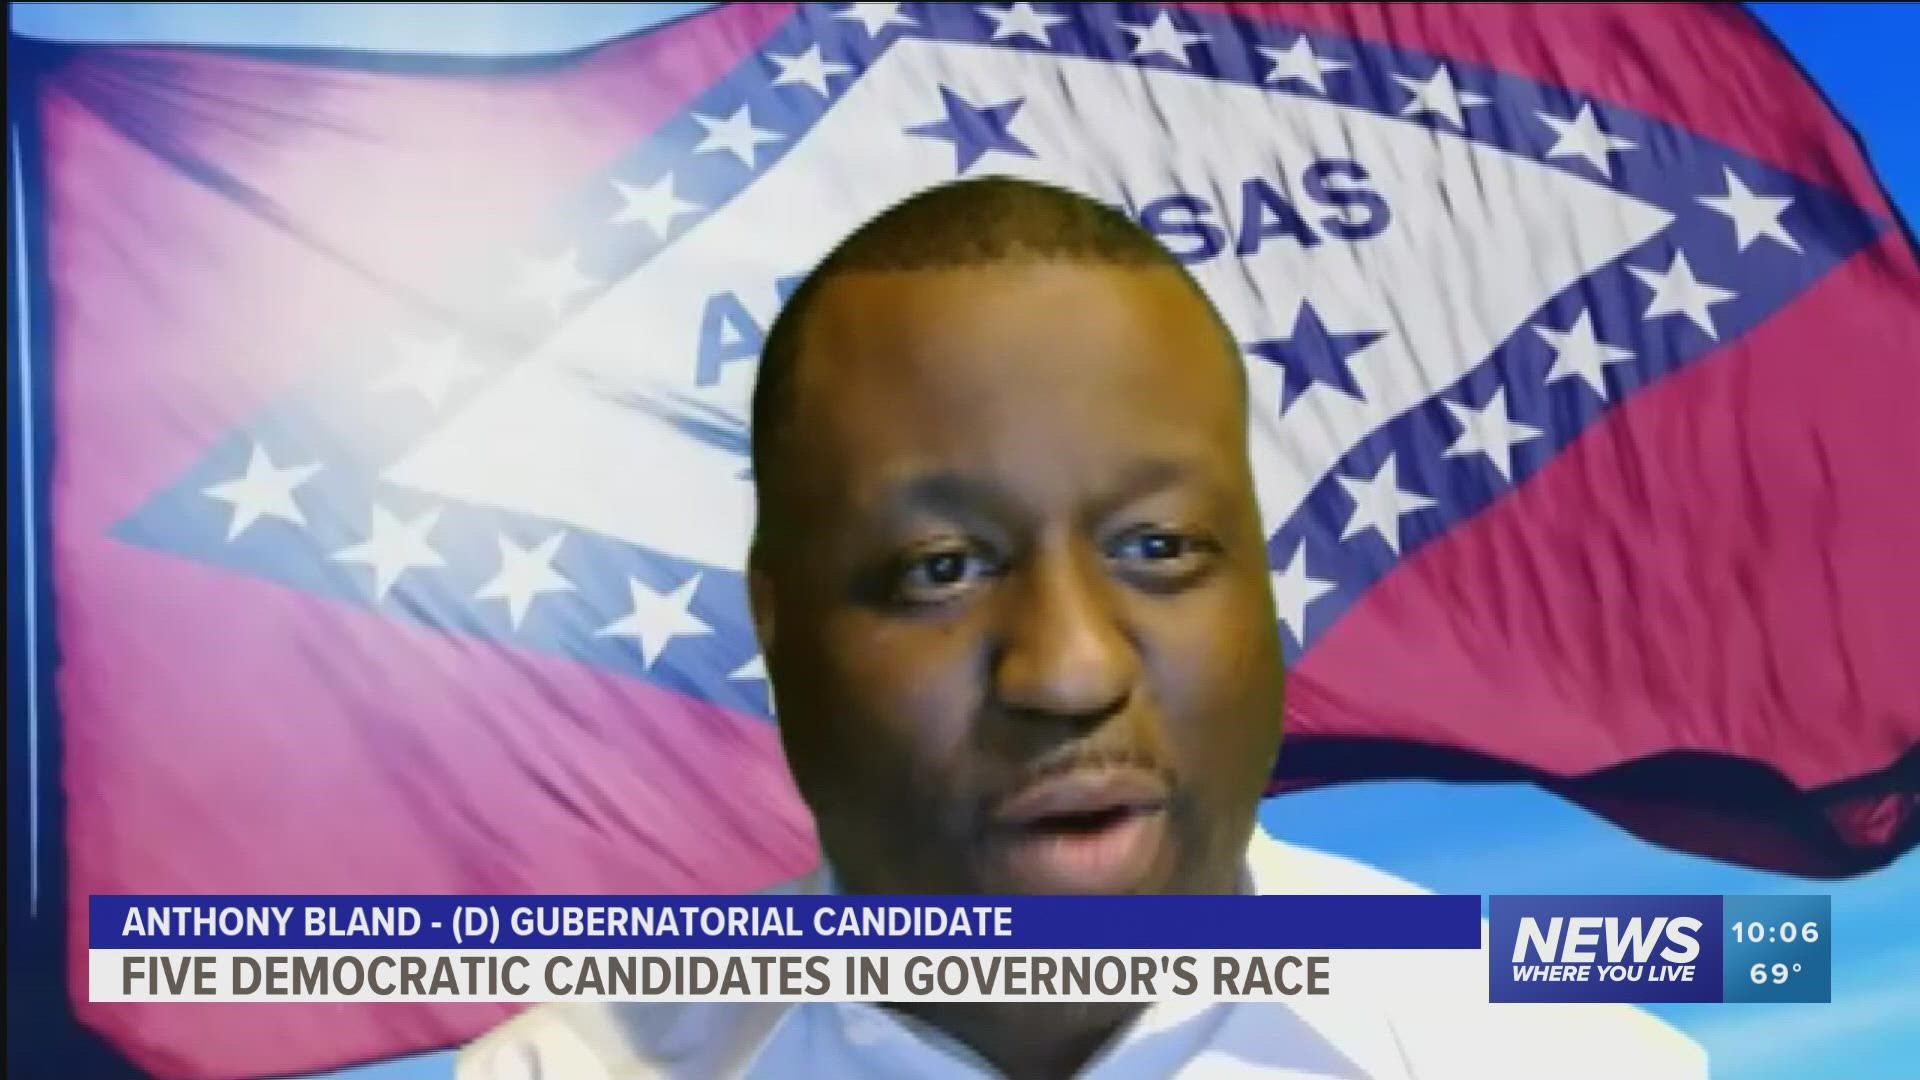 We spoke with the Democratic candidates vying for their chance to run for Arkansas Governor.